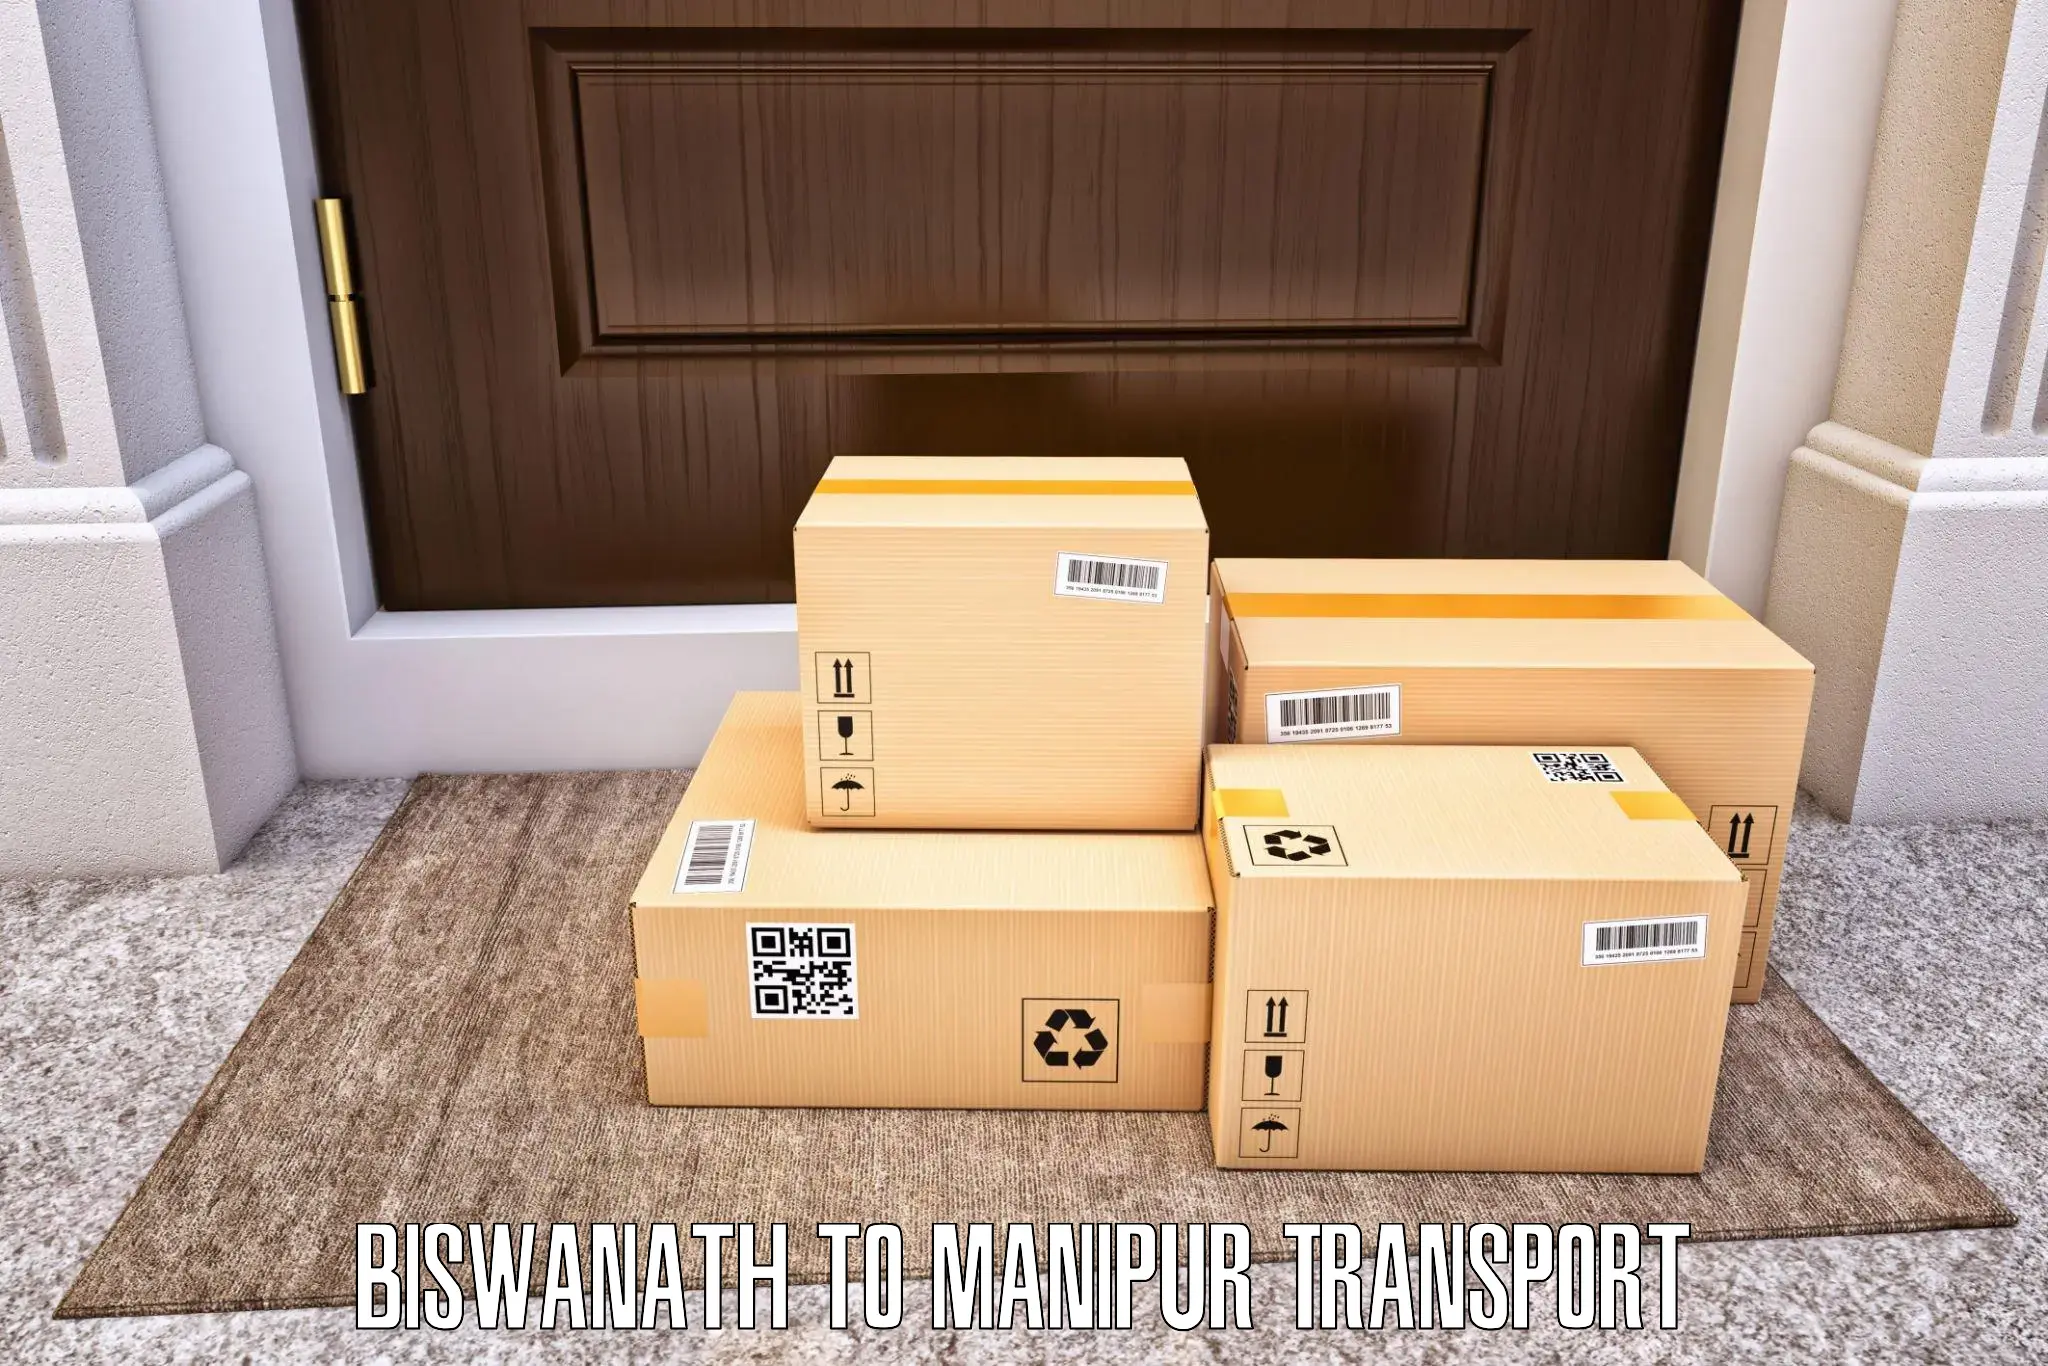 Road transport services in Biswanath to Imphal